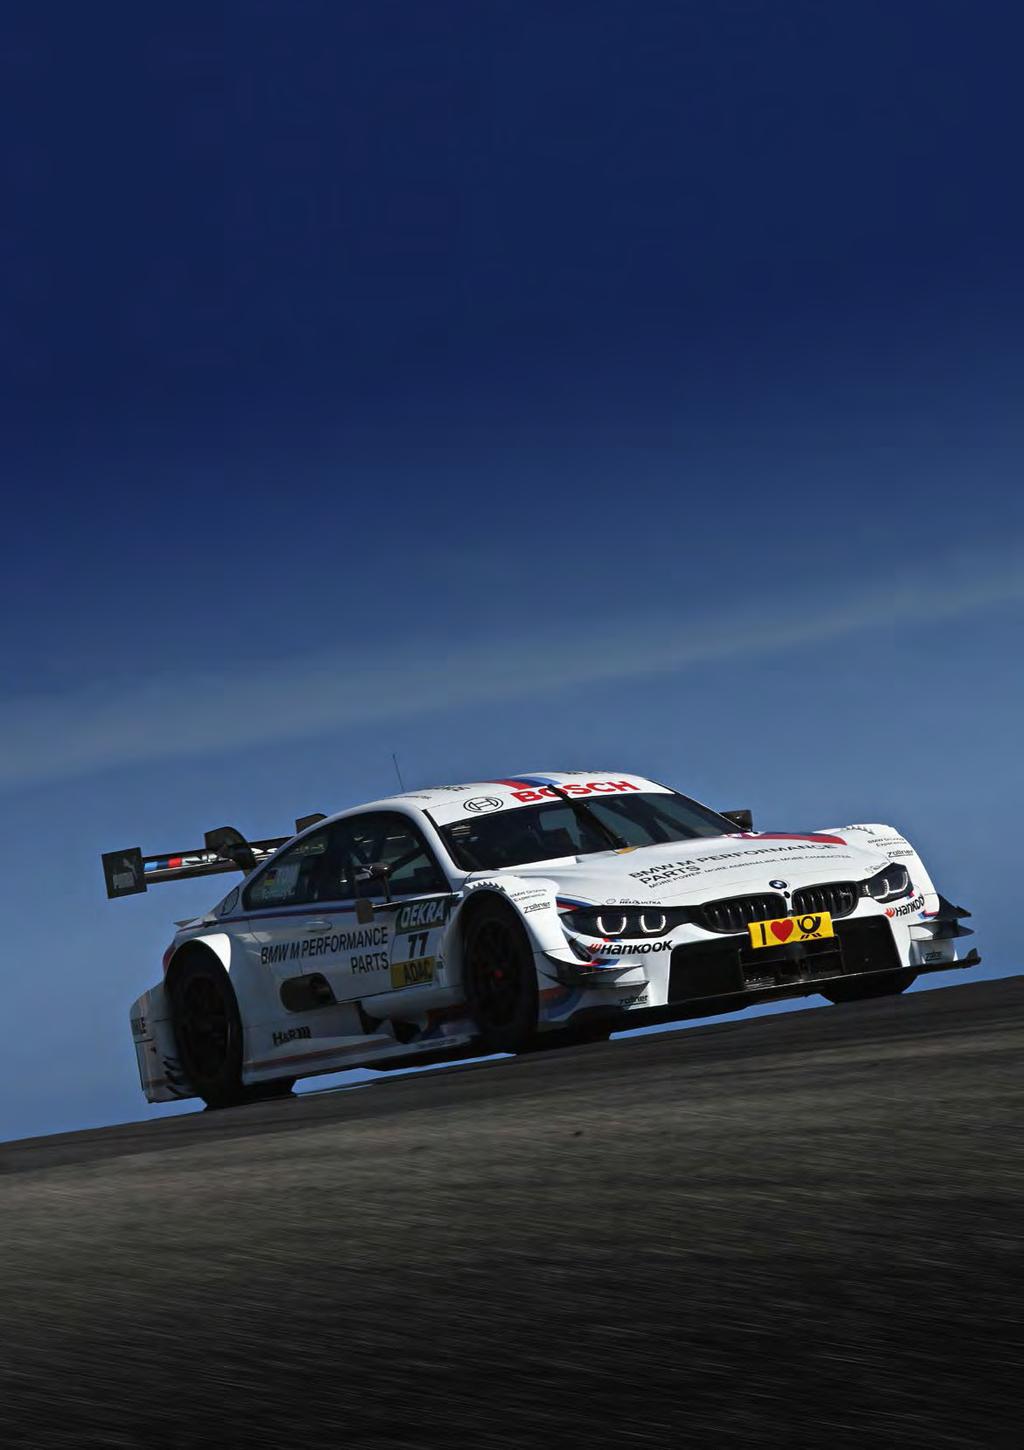 DEUTSCHE TOURENWAGEN MASTERS. 2015 SEASON TITLE DEFENCE WITH TWICE THE ACTION. 2015 sees BMW Motorsport enter its fourth season since returning to the DTM. The record so far is outstanding.